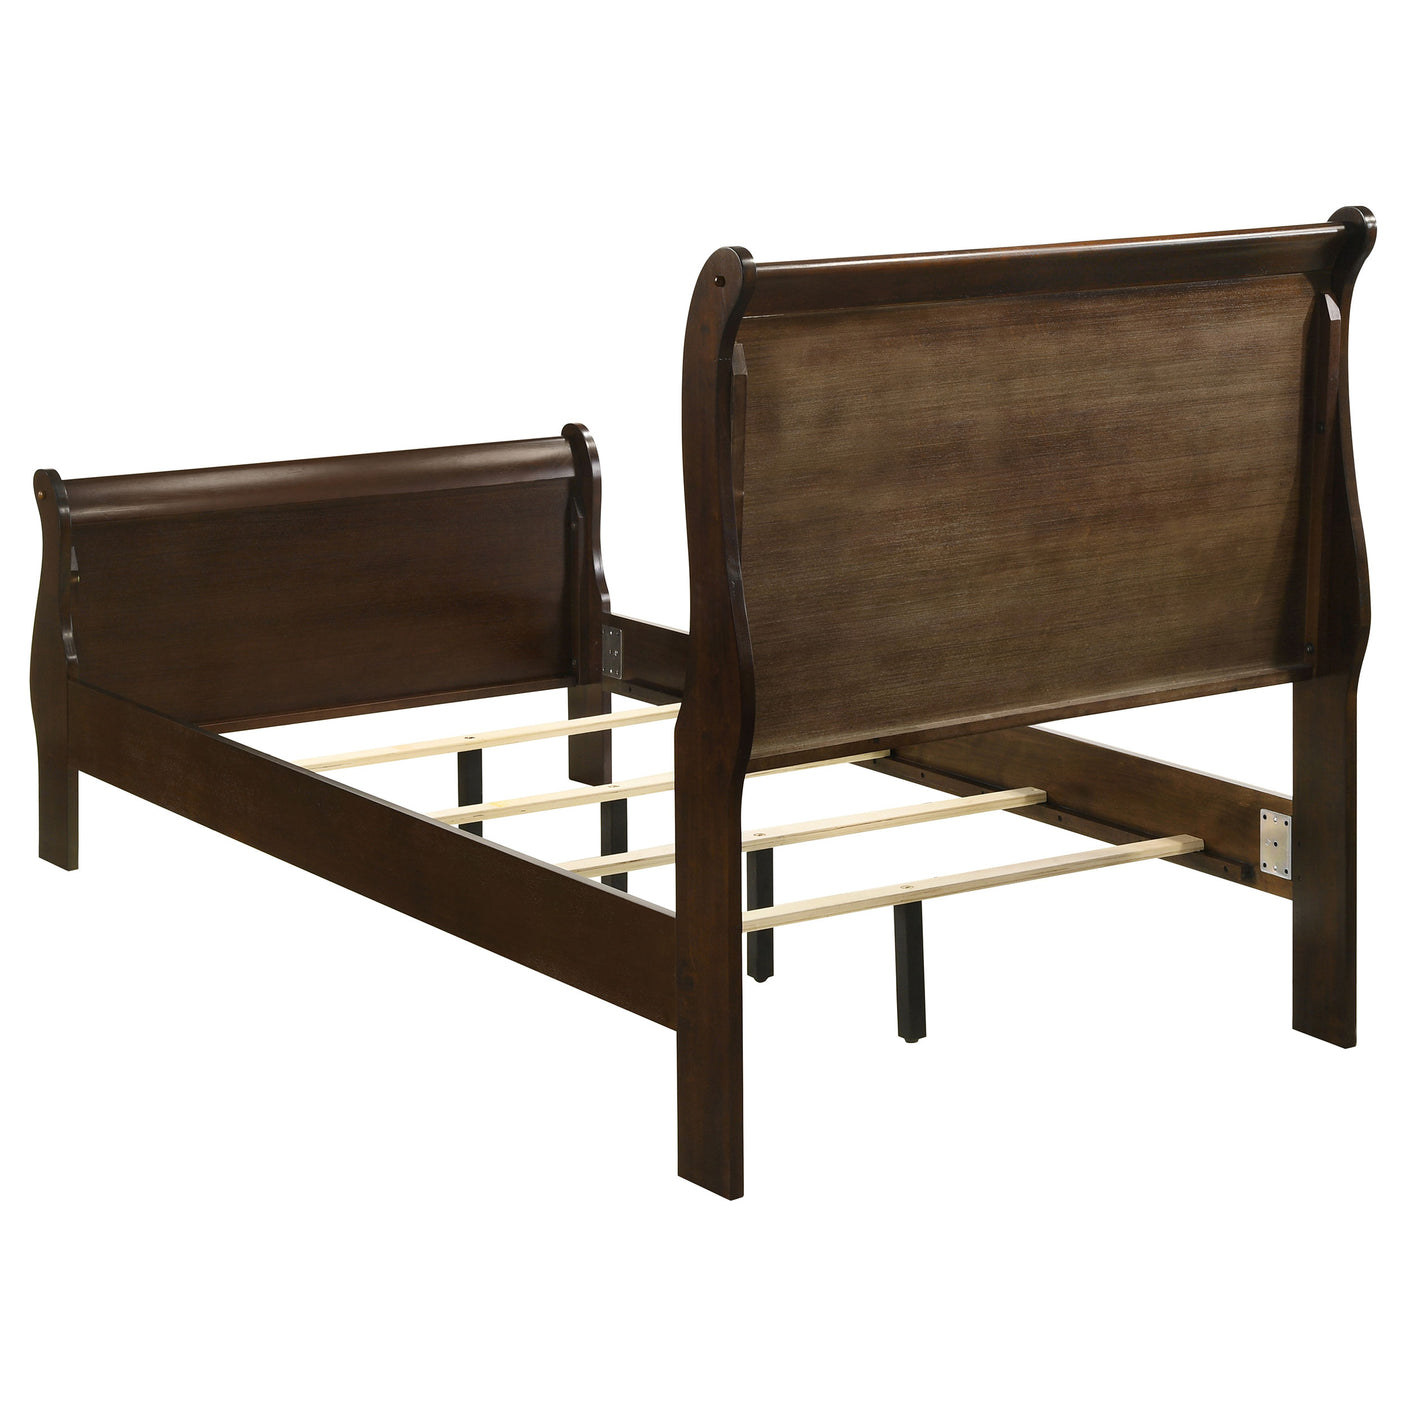 Twin Bed - Louis Philippe Wood Twin Sleigh Bed Cappuccino